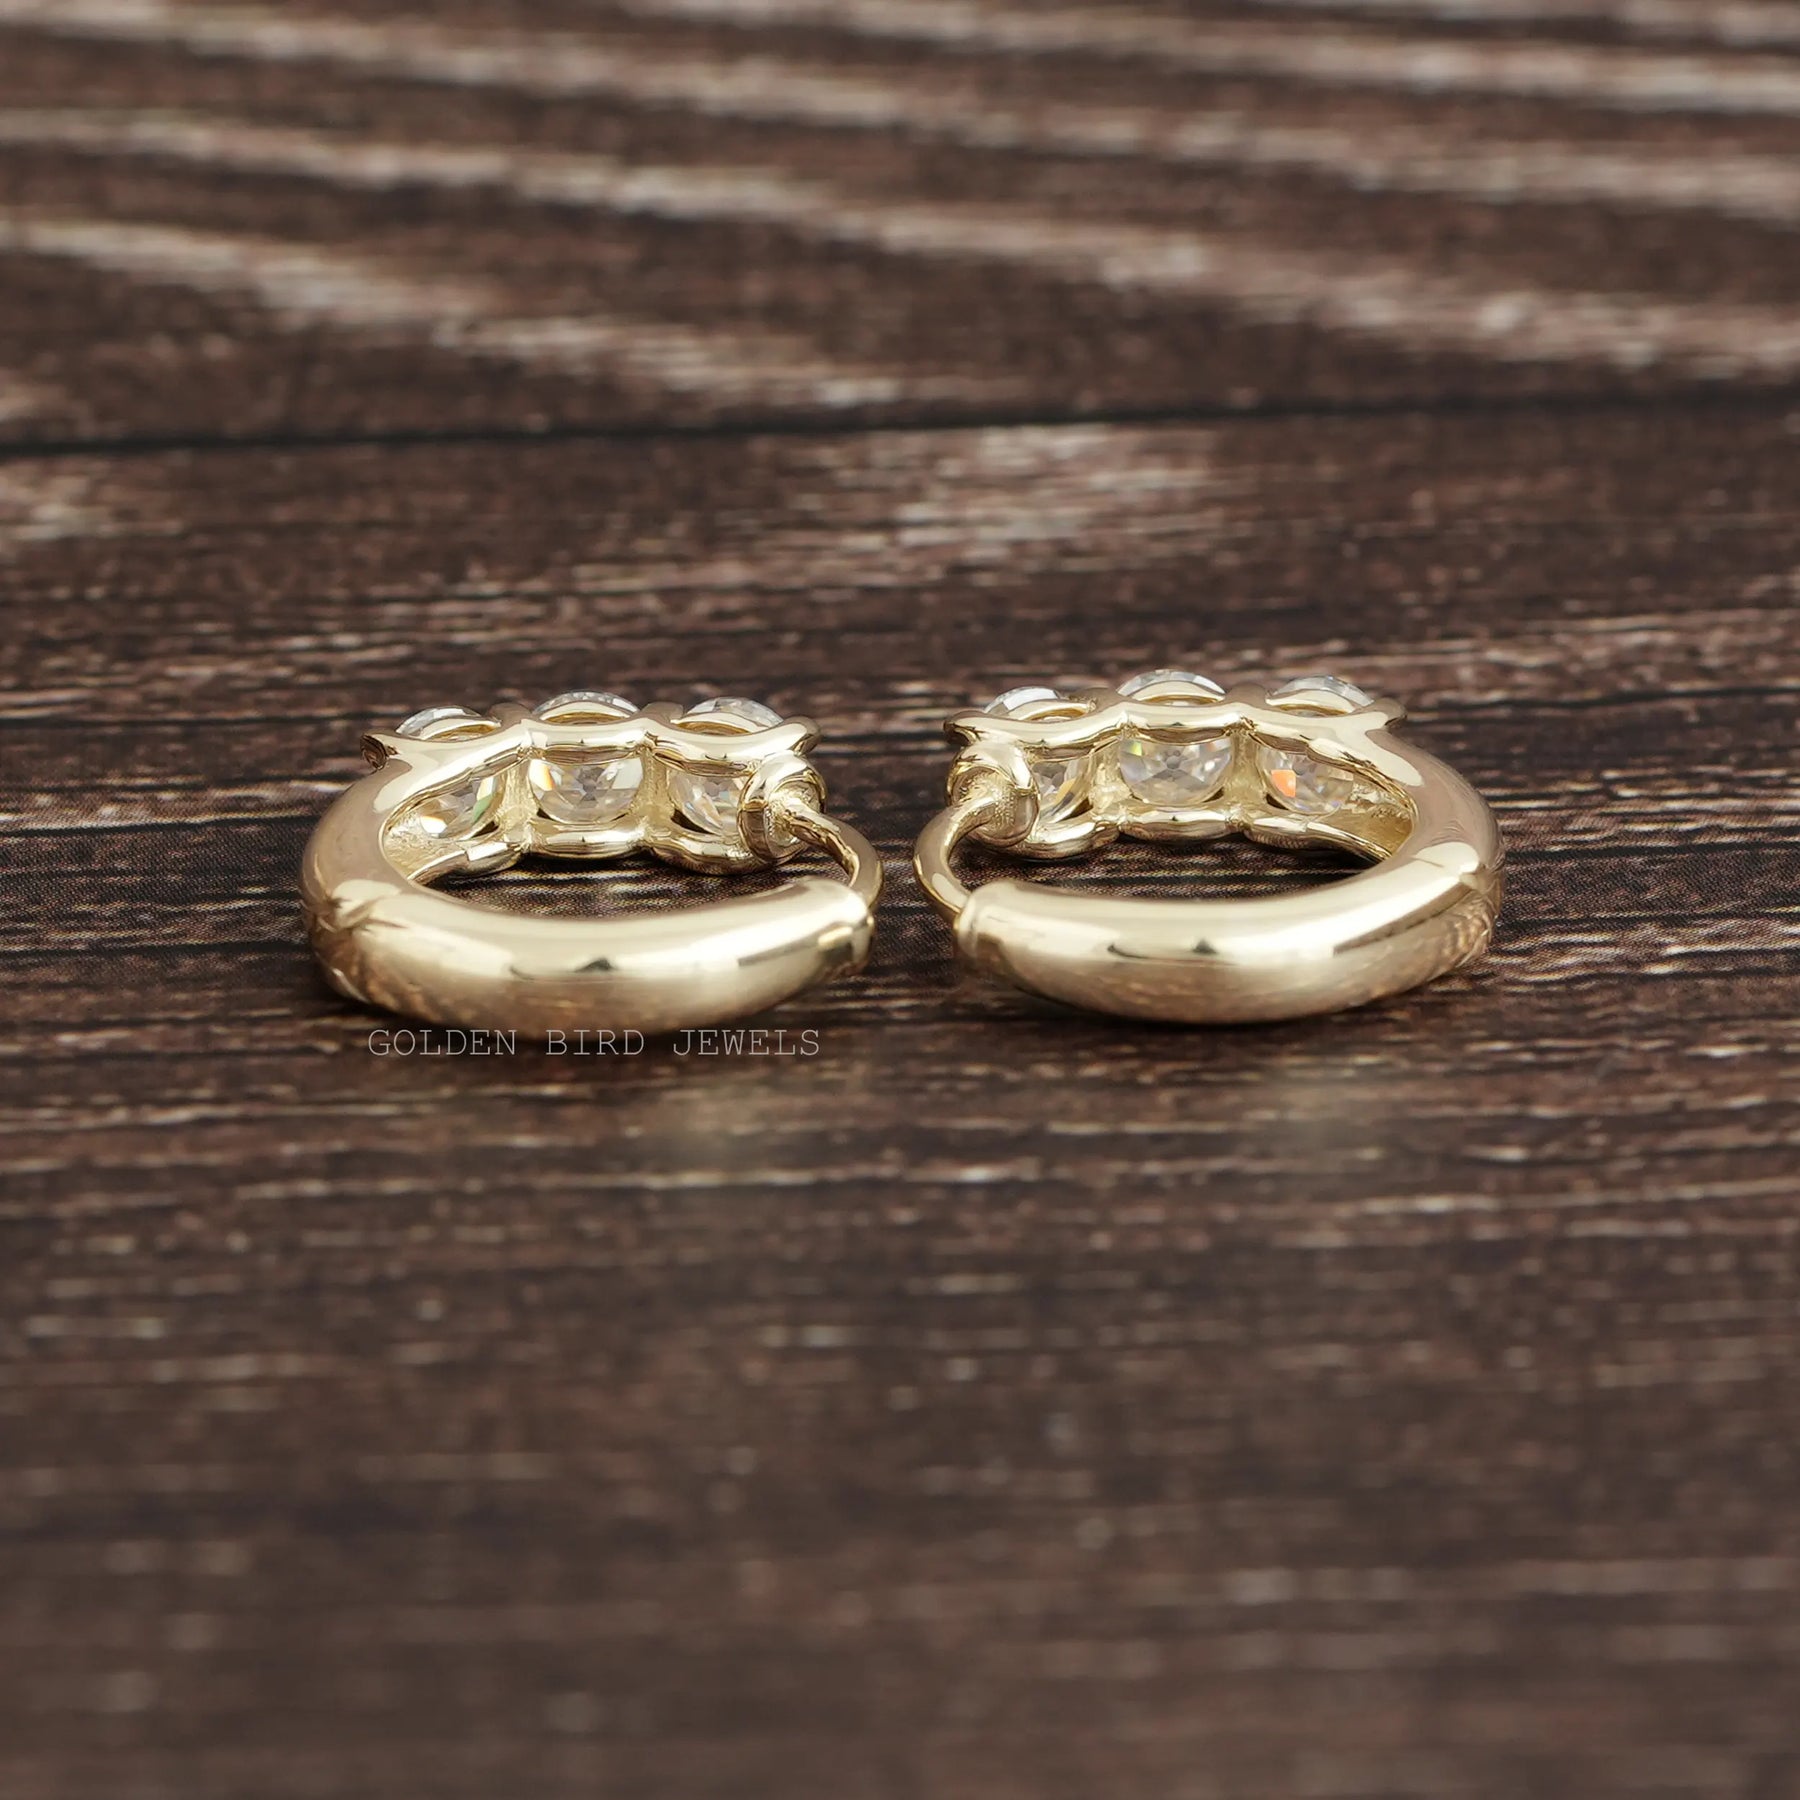 [Back view of round cut moissanite earrings made of yellow gold]-[Golden Bird Jewels]